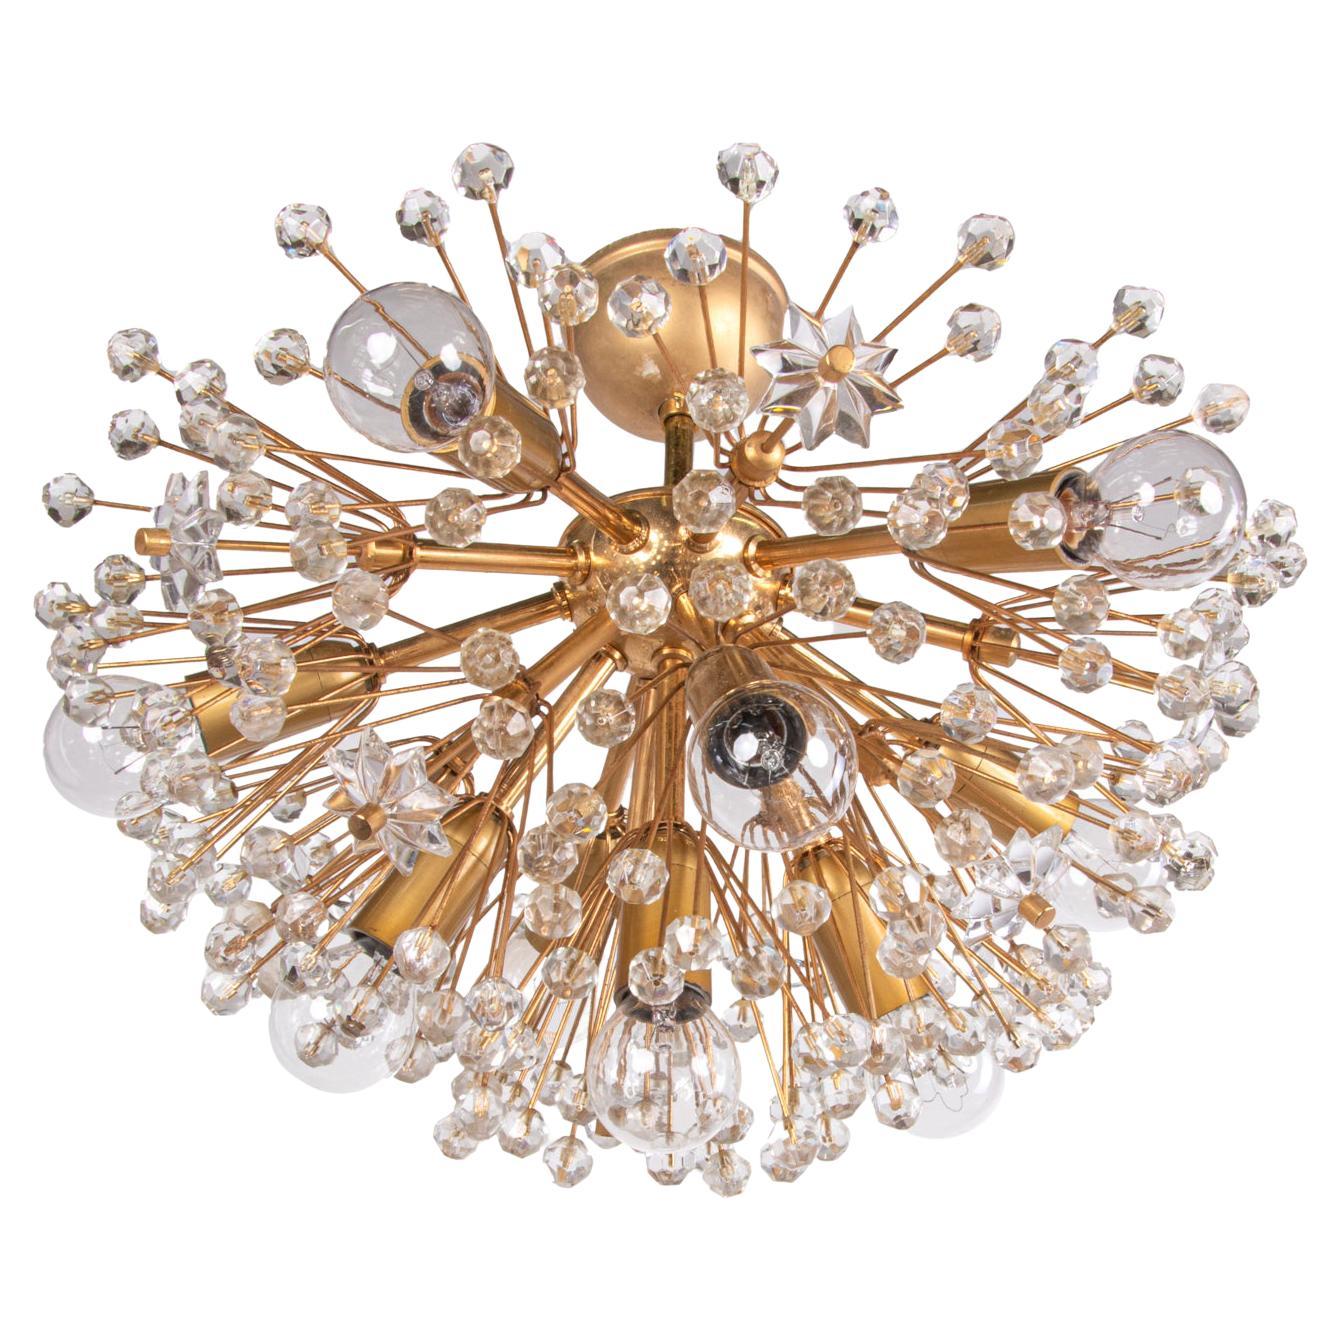 Elegant semi flush mount sputnik snowball chandelier with crystal flowers on a brass frame designed by Emil Stejnar for Rupert Nikoll, Vienna, Austria in the 1950s. 
This beautiful polished brass chandeliersupports clusters of dandelions that are